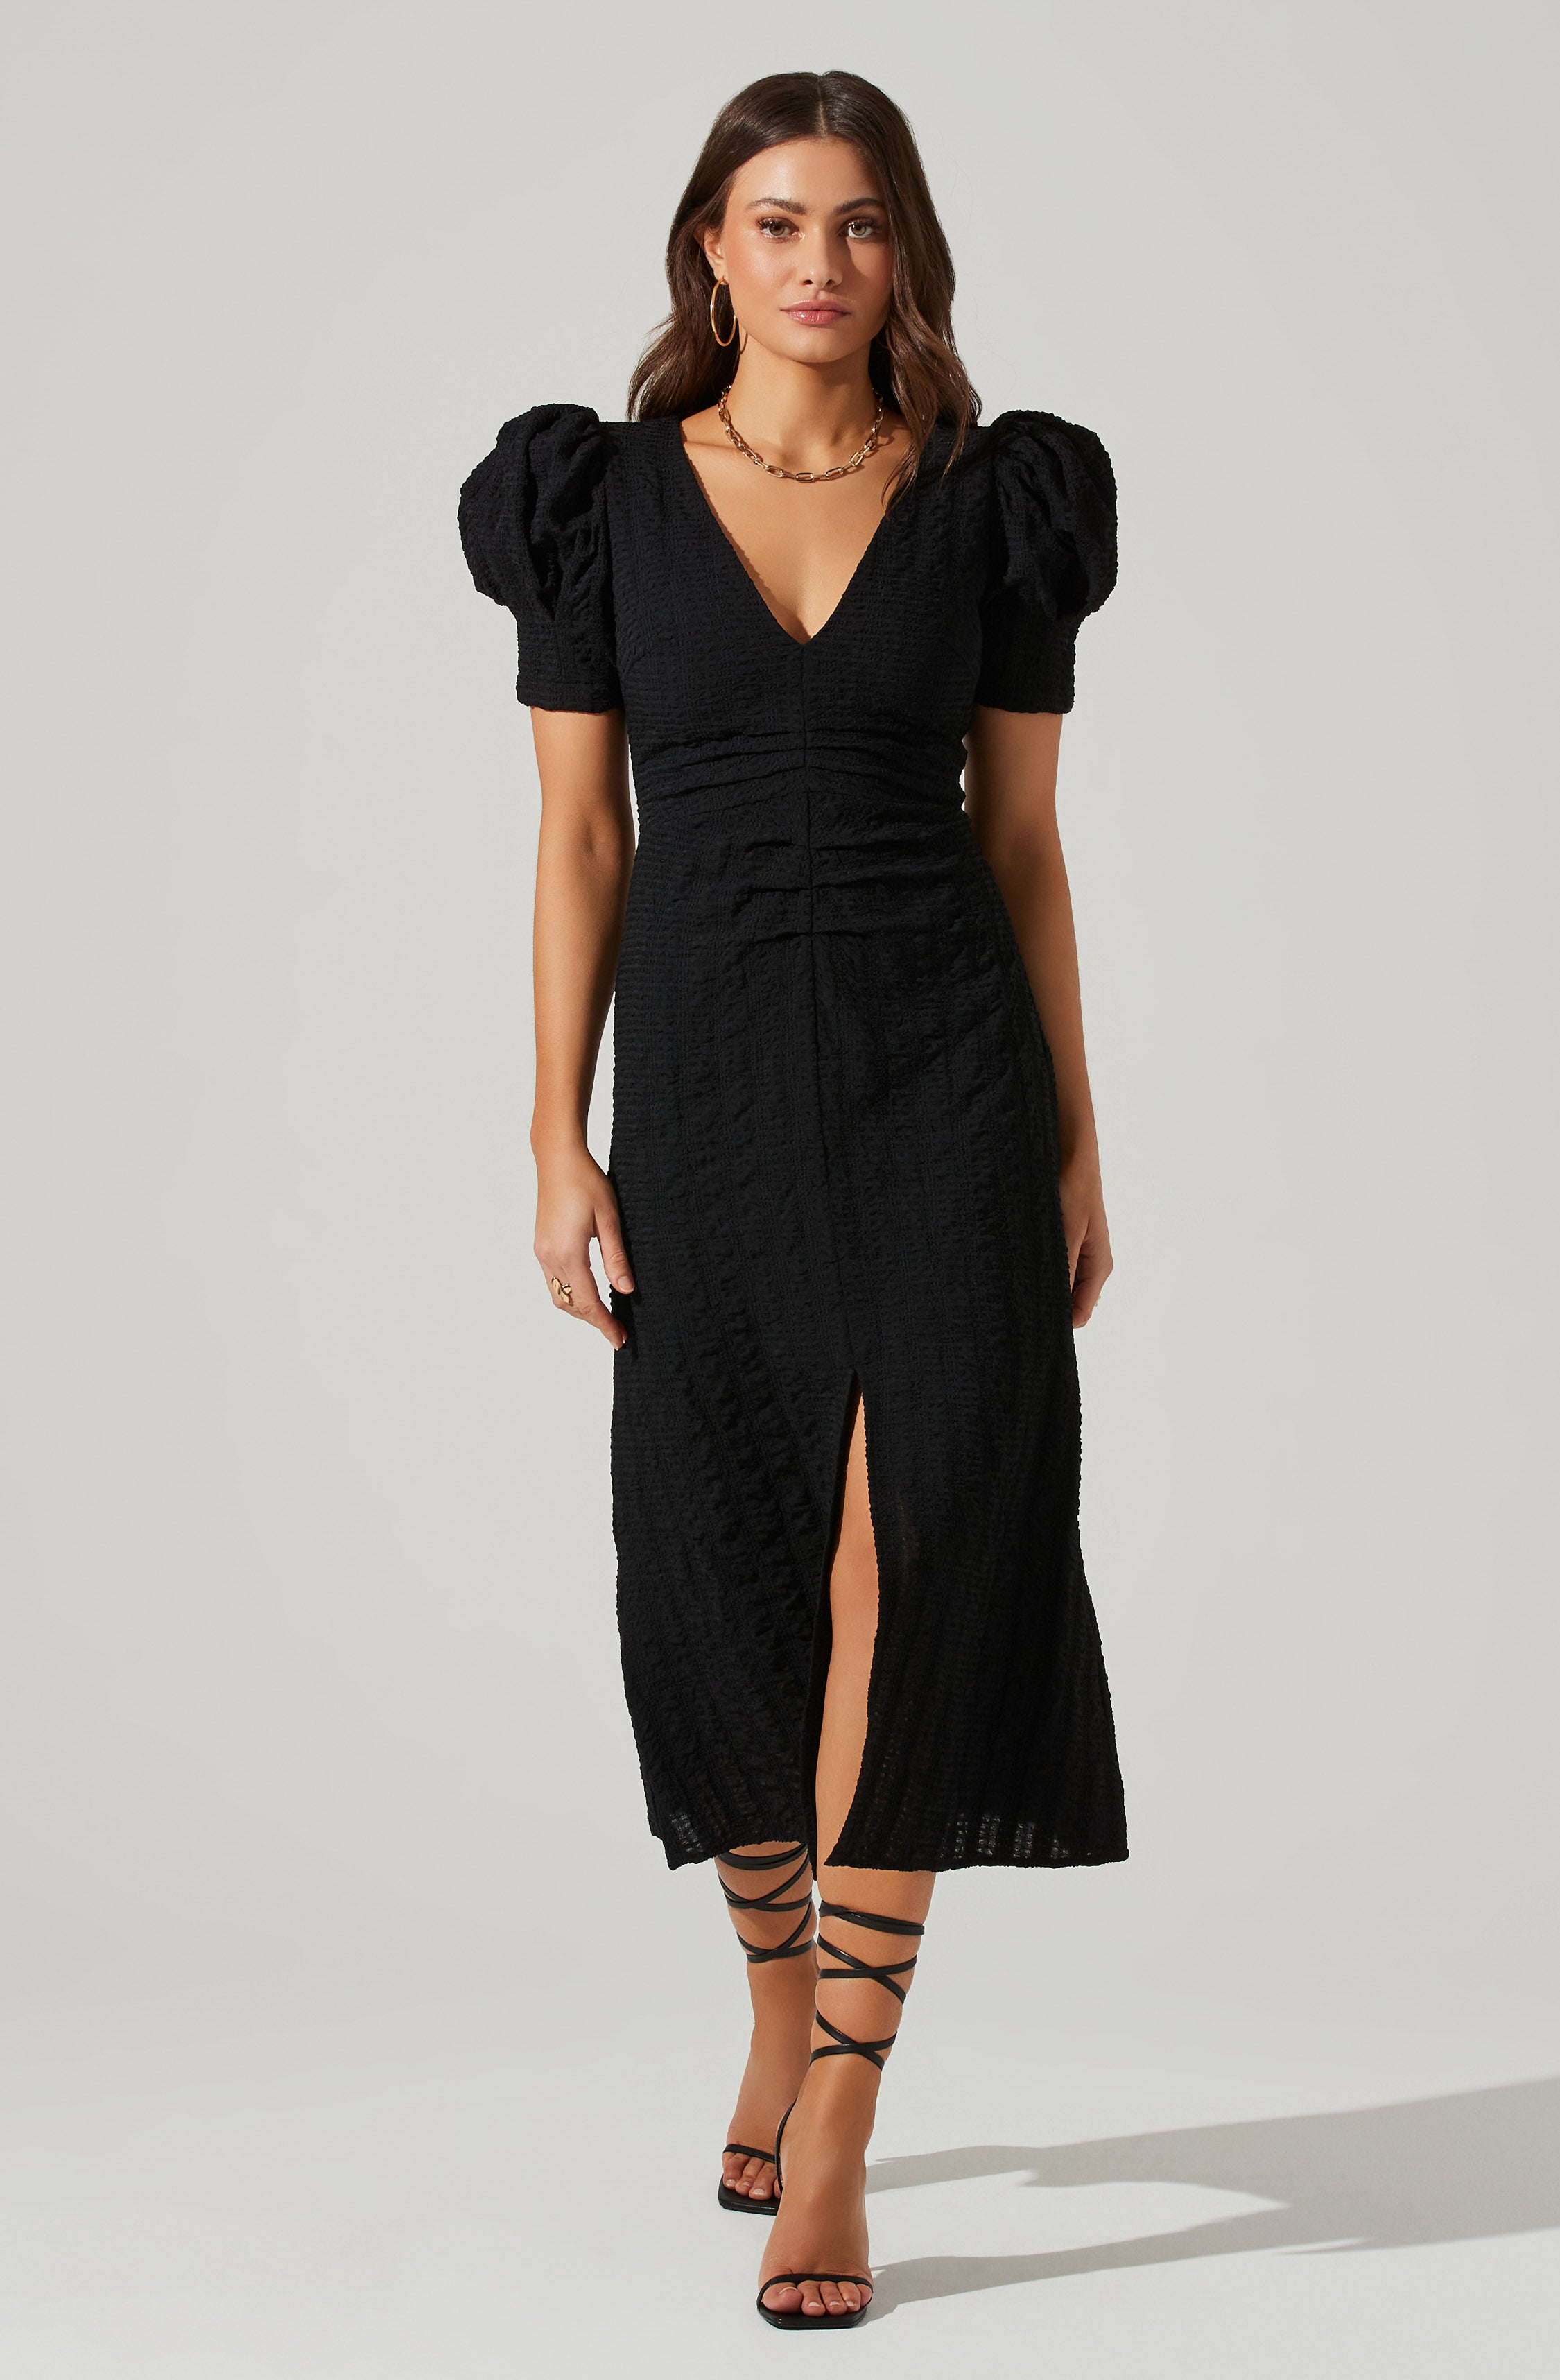 Puff Sleeve V Front Dress Midi – The ASTR Label